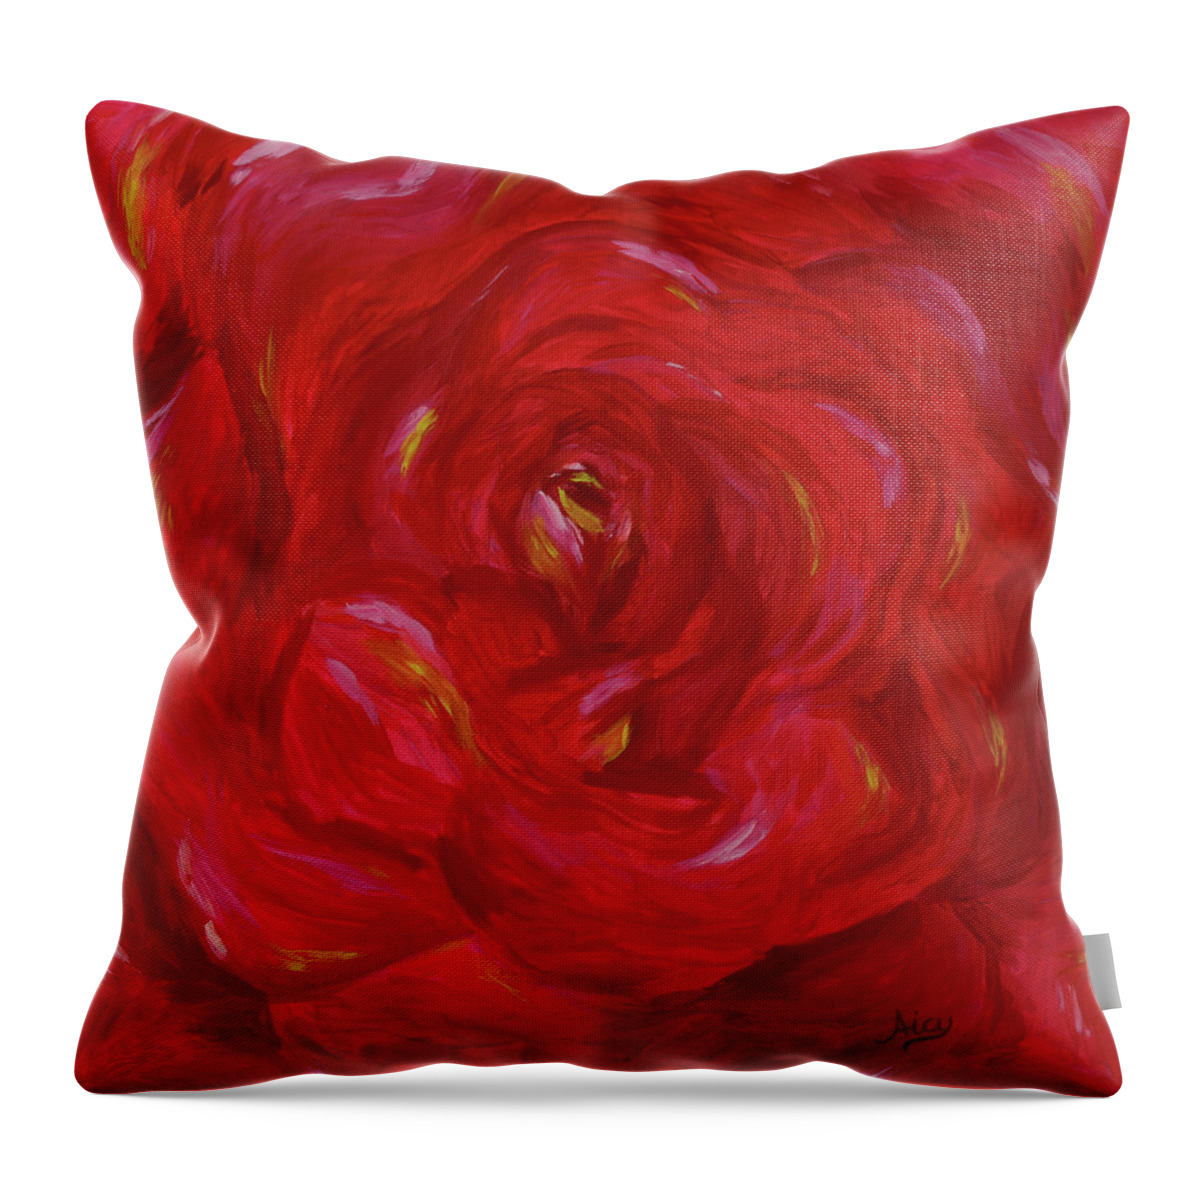 Rose Throw Pillow featuring the painting Rose Love Peace by Aicy Karbstein